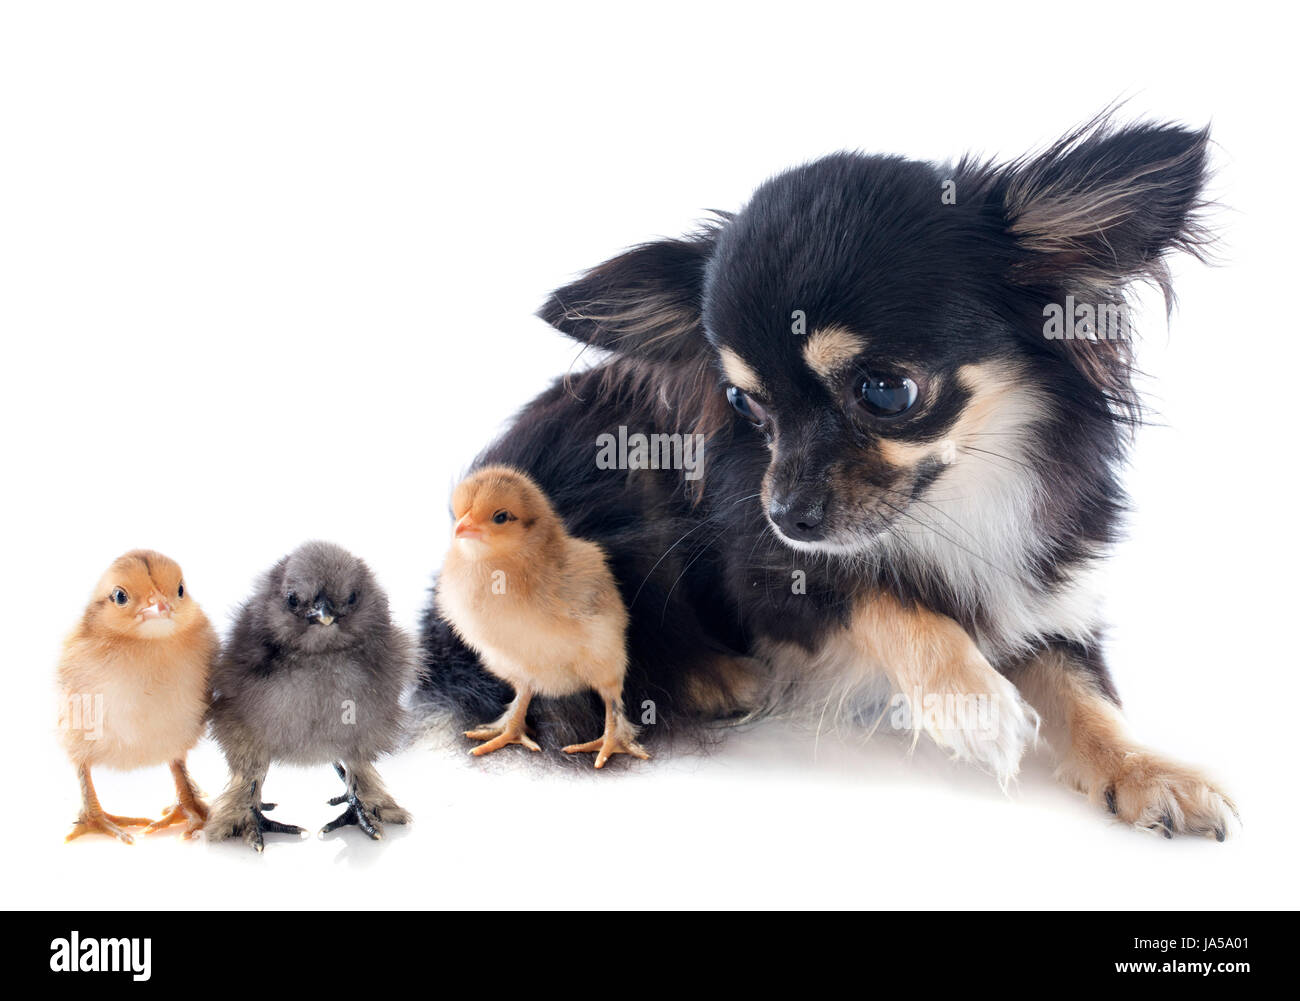 chicks of bantam and chihuahua on a white background Stock Photo